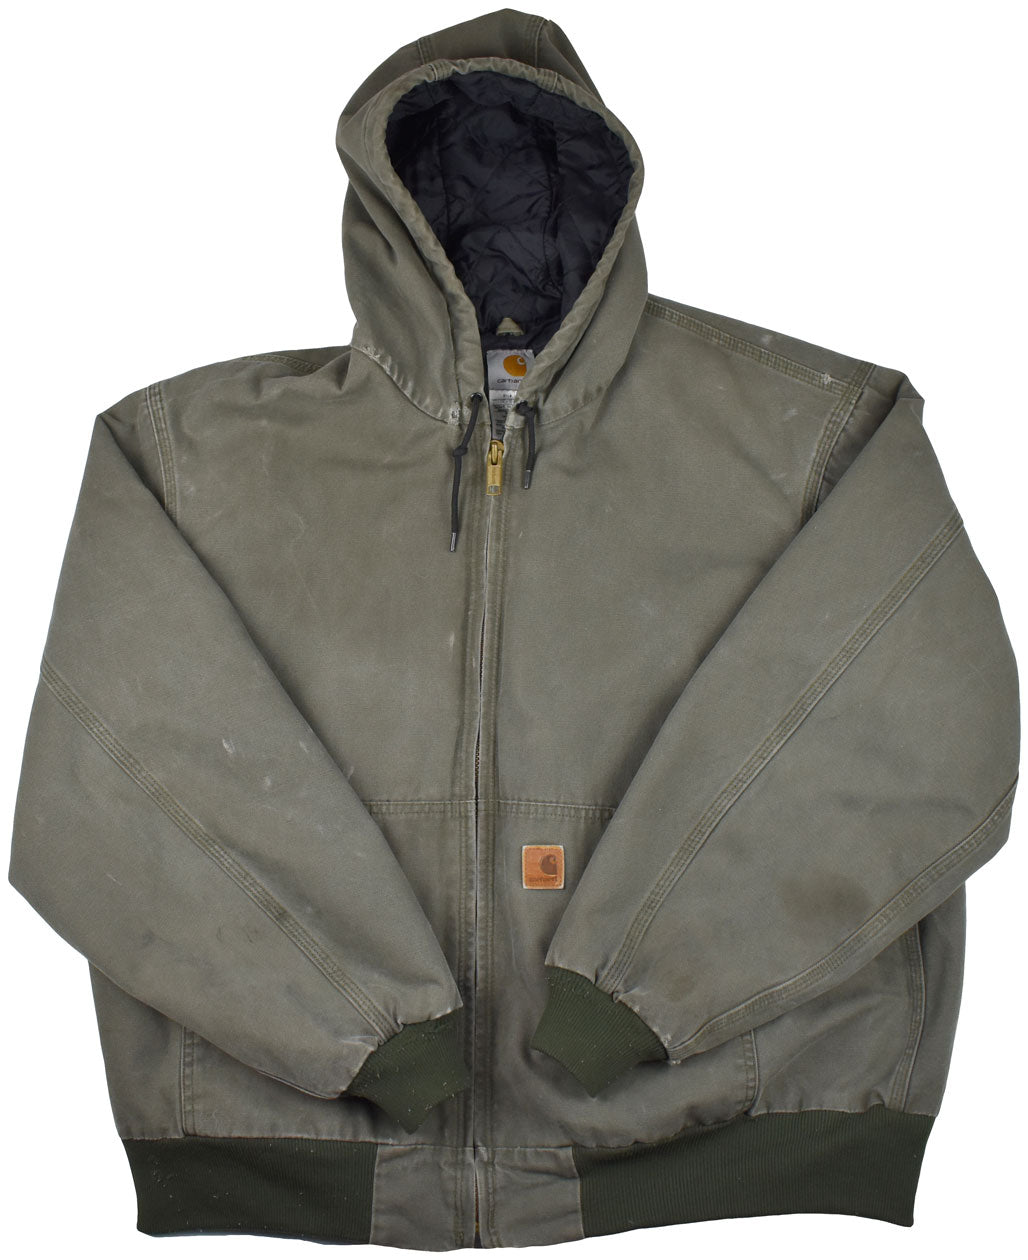 Vintage Carhartt 90s Hooded Work Jacket  Vintage Carhartt hooded work jacket with a really cool fade and vintage look. The piece has some holes and stains. Perfect vintage condition.